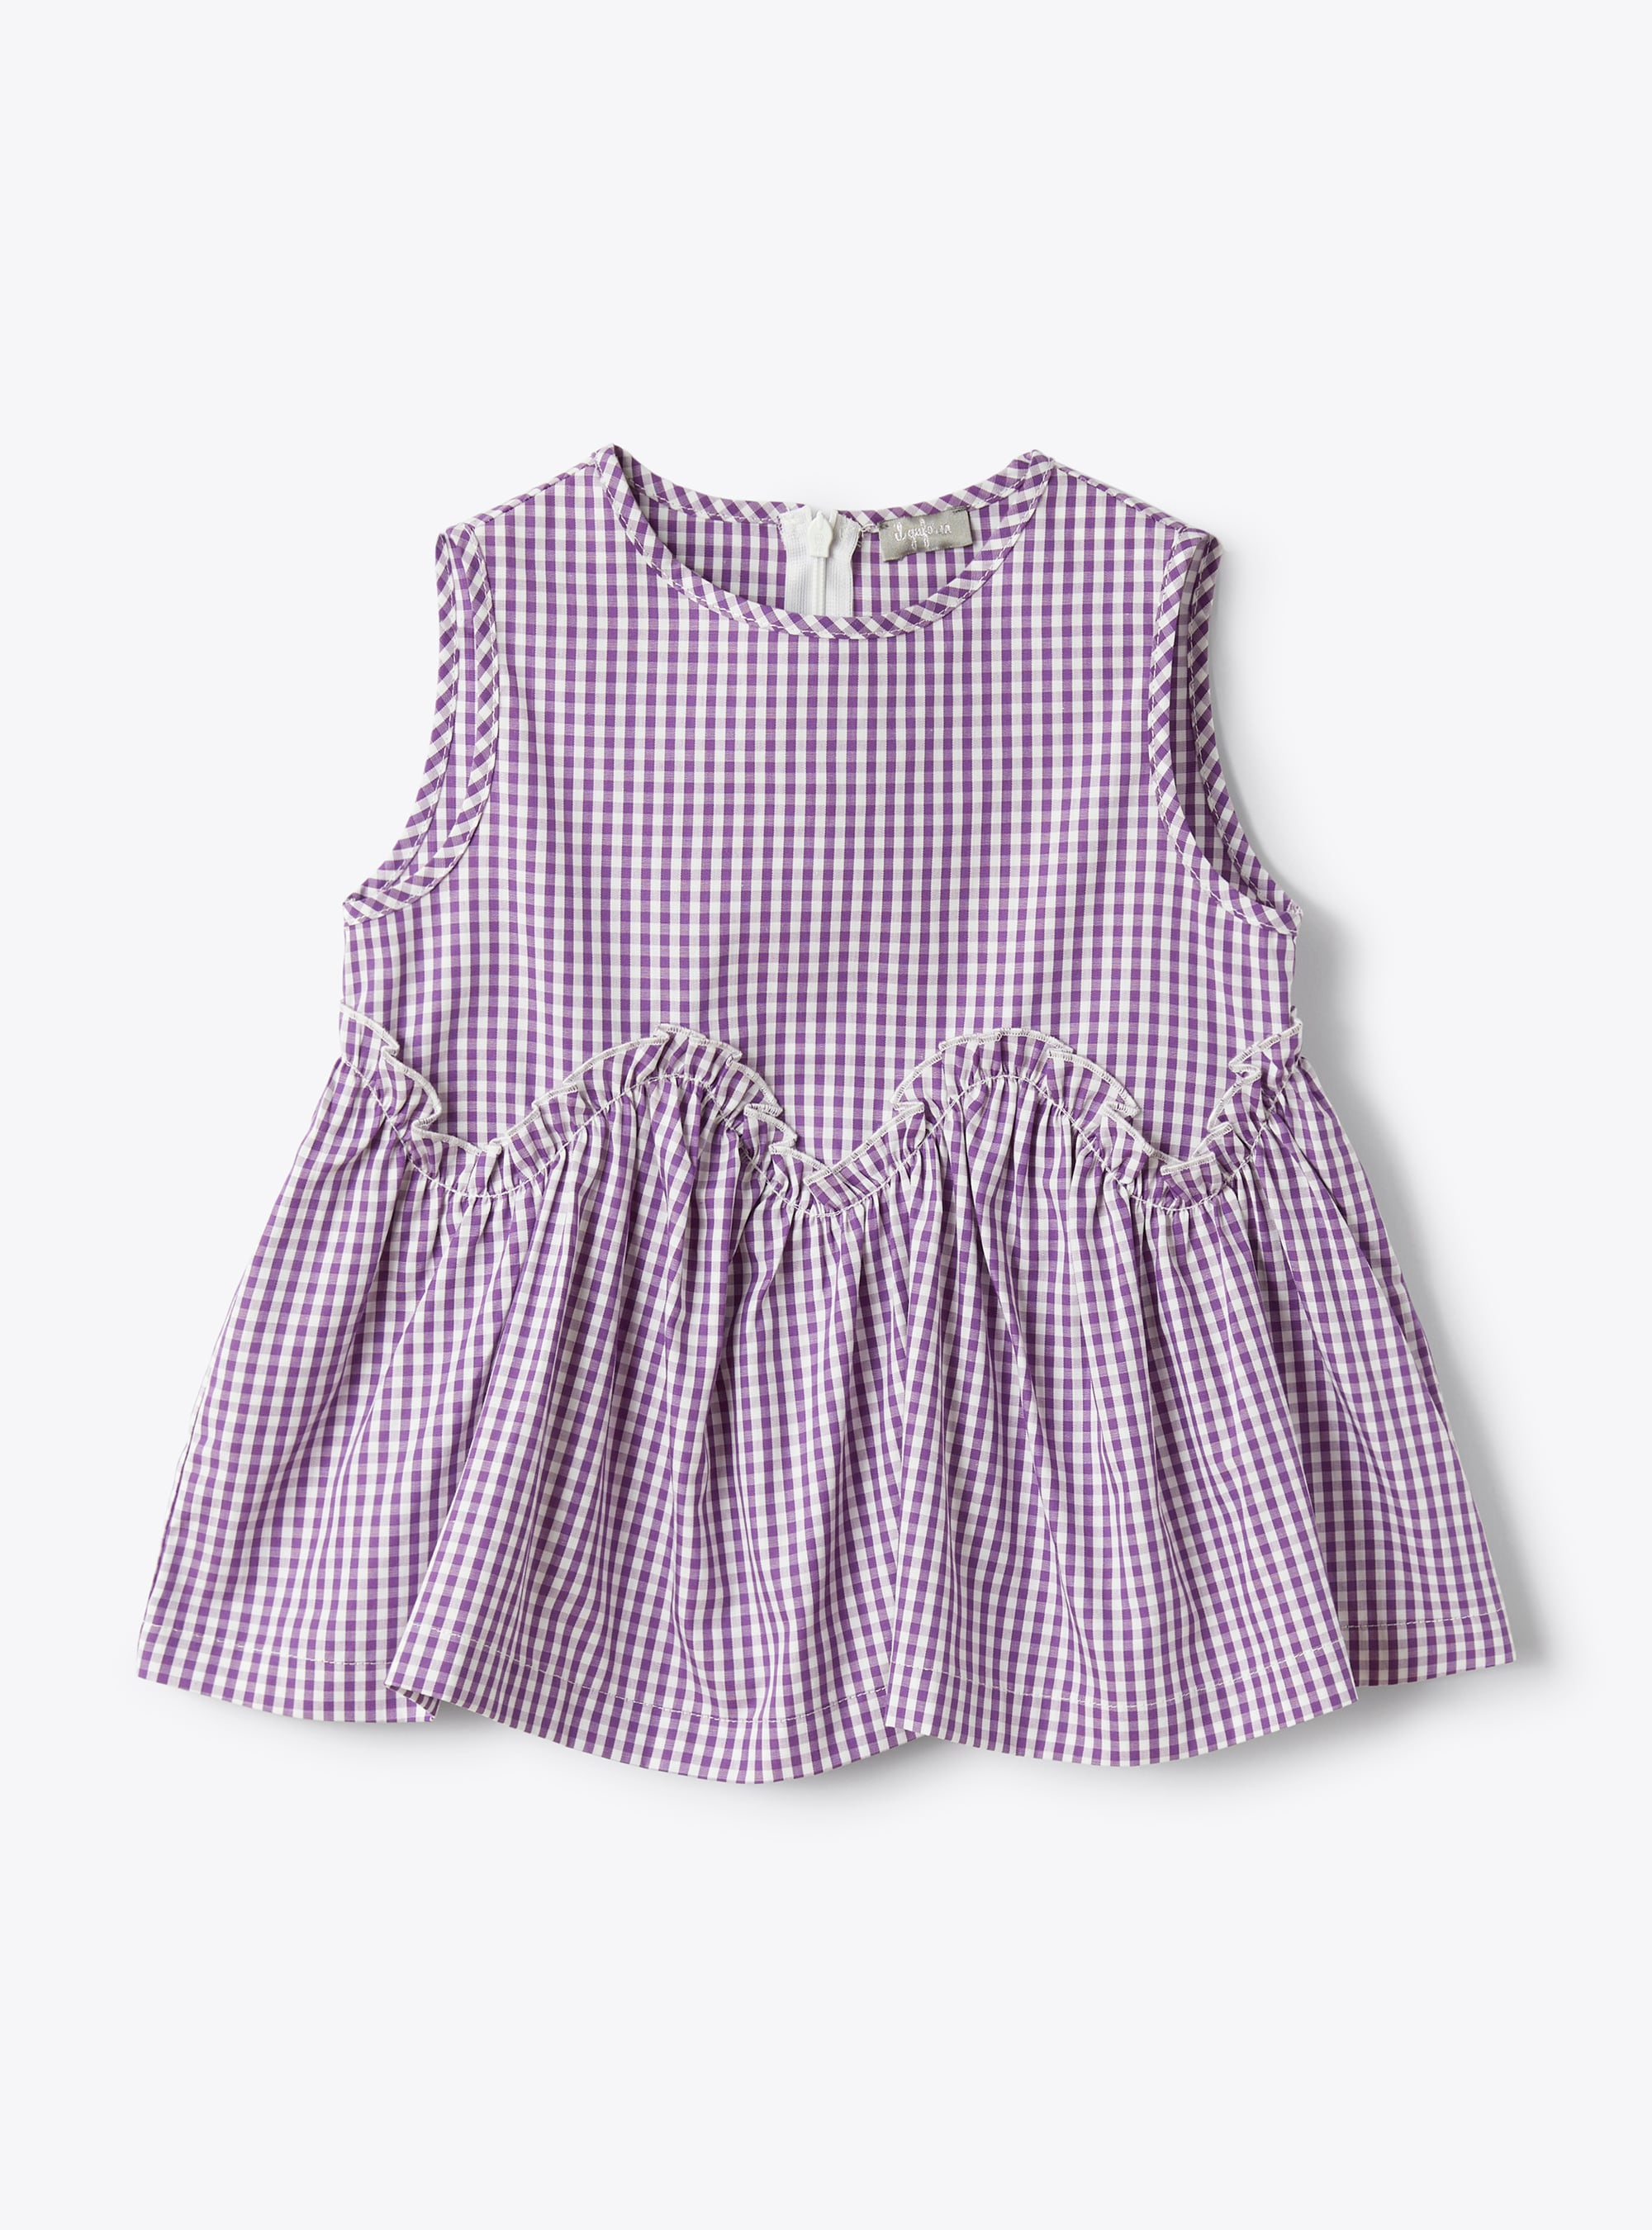 Sleeveless top in a gingham check - T-shirts - Il Gufo